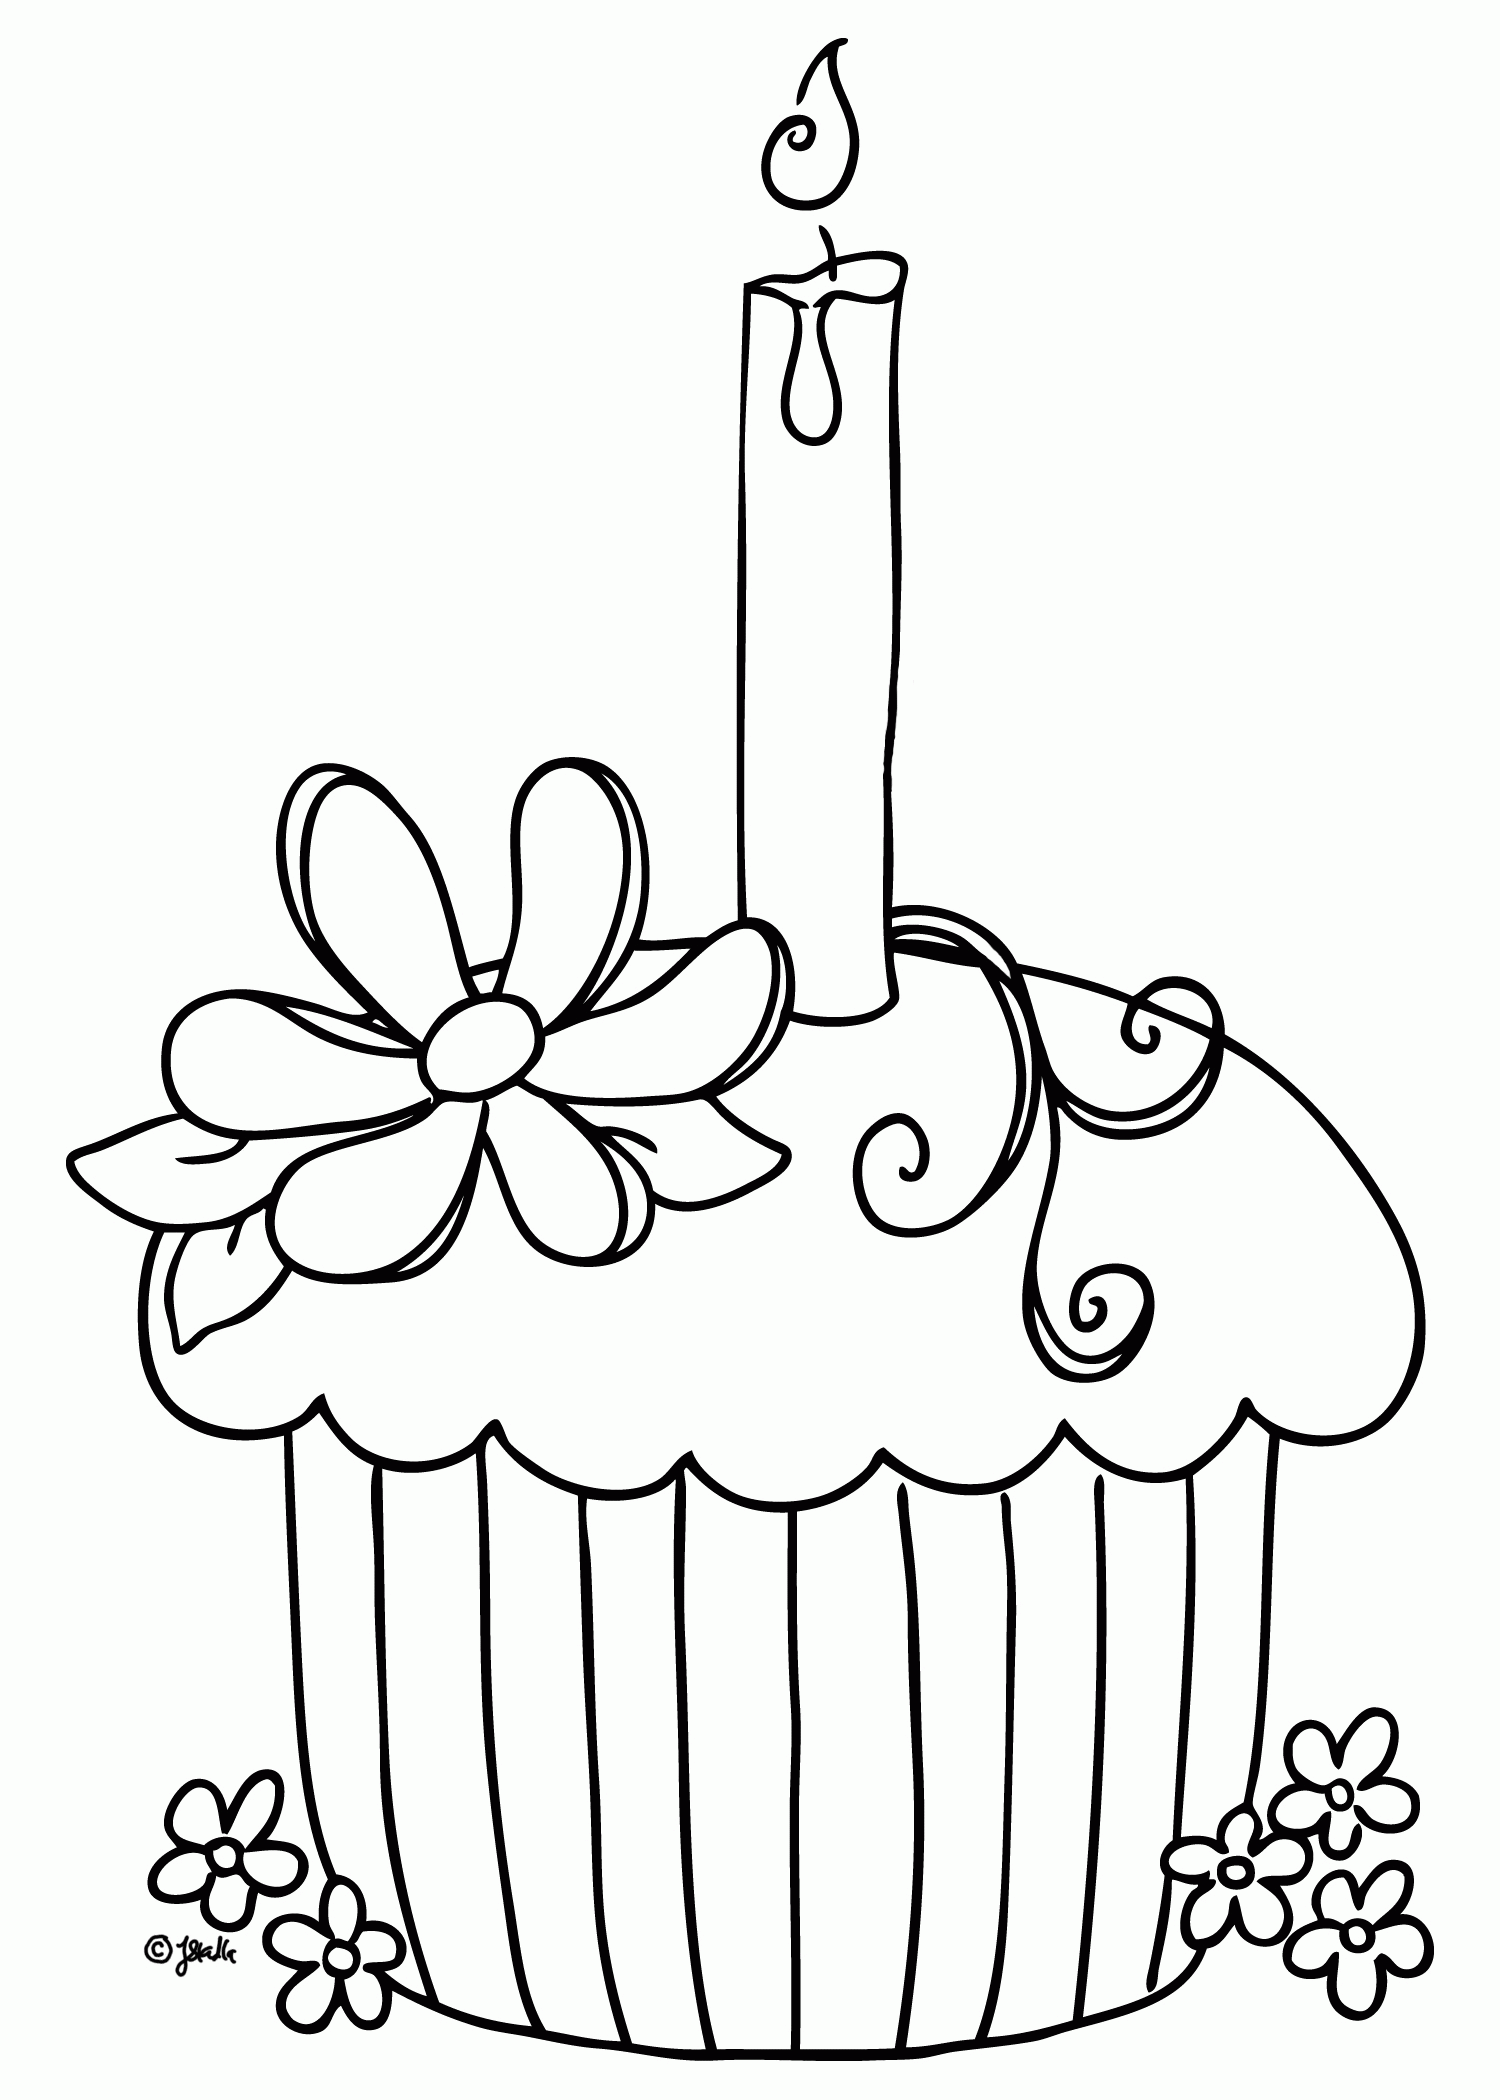 Free Hello Kitty Cupcake Coloring Pages, Download Free Hello Kitty